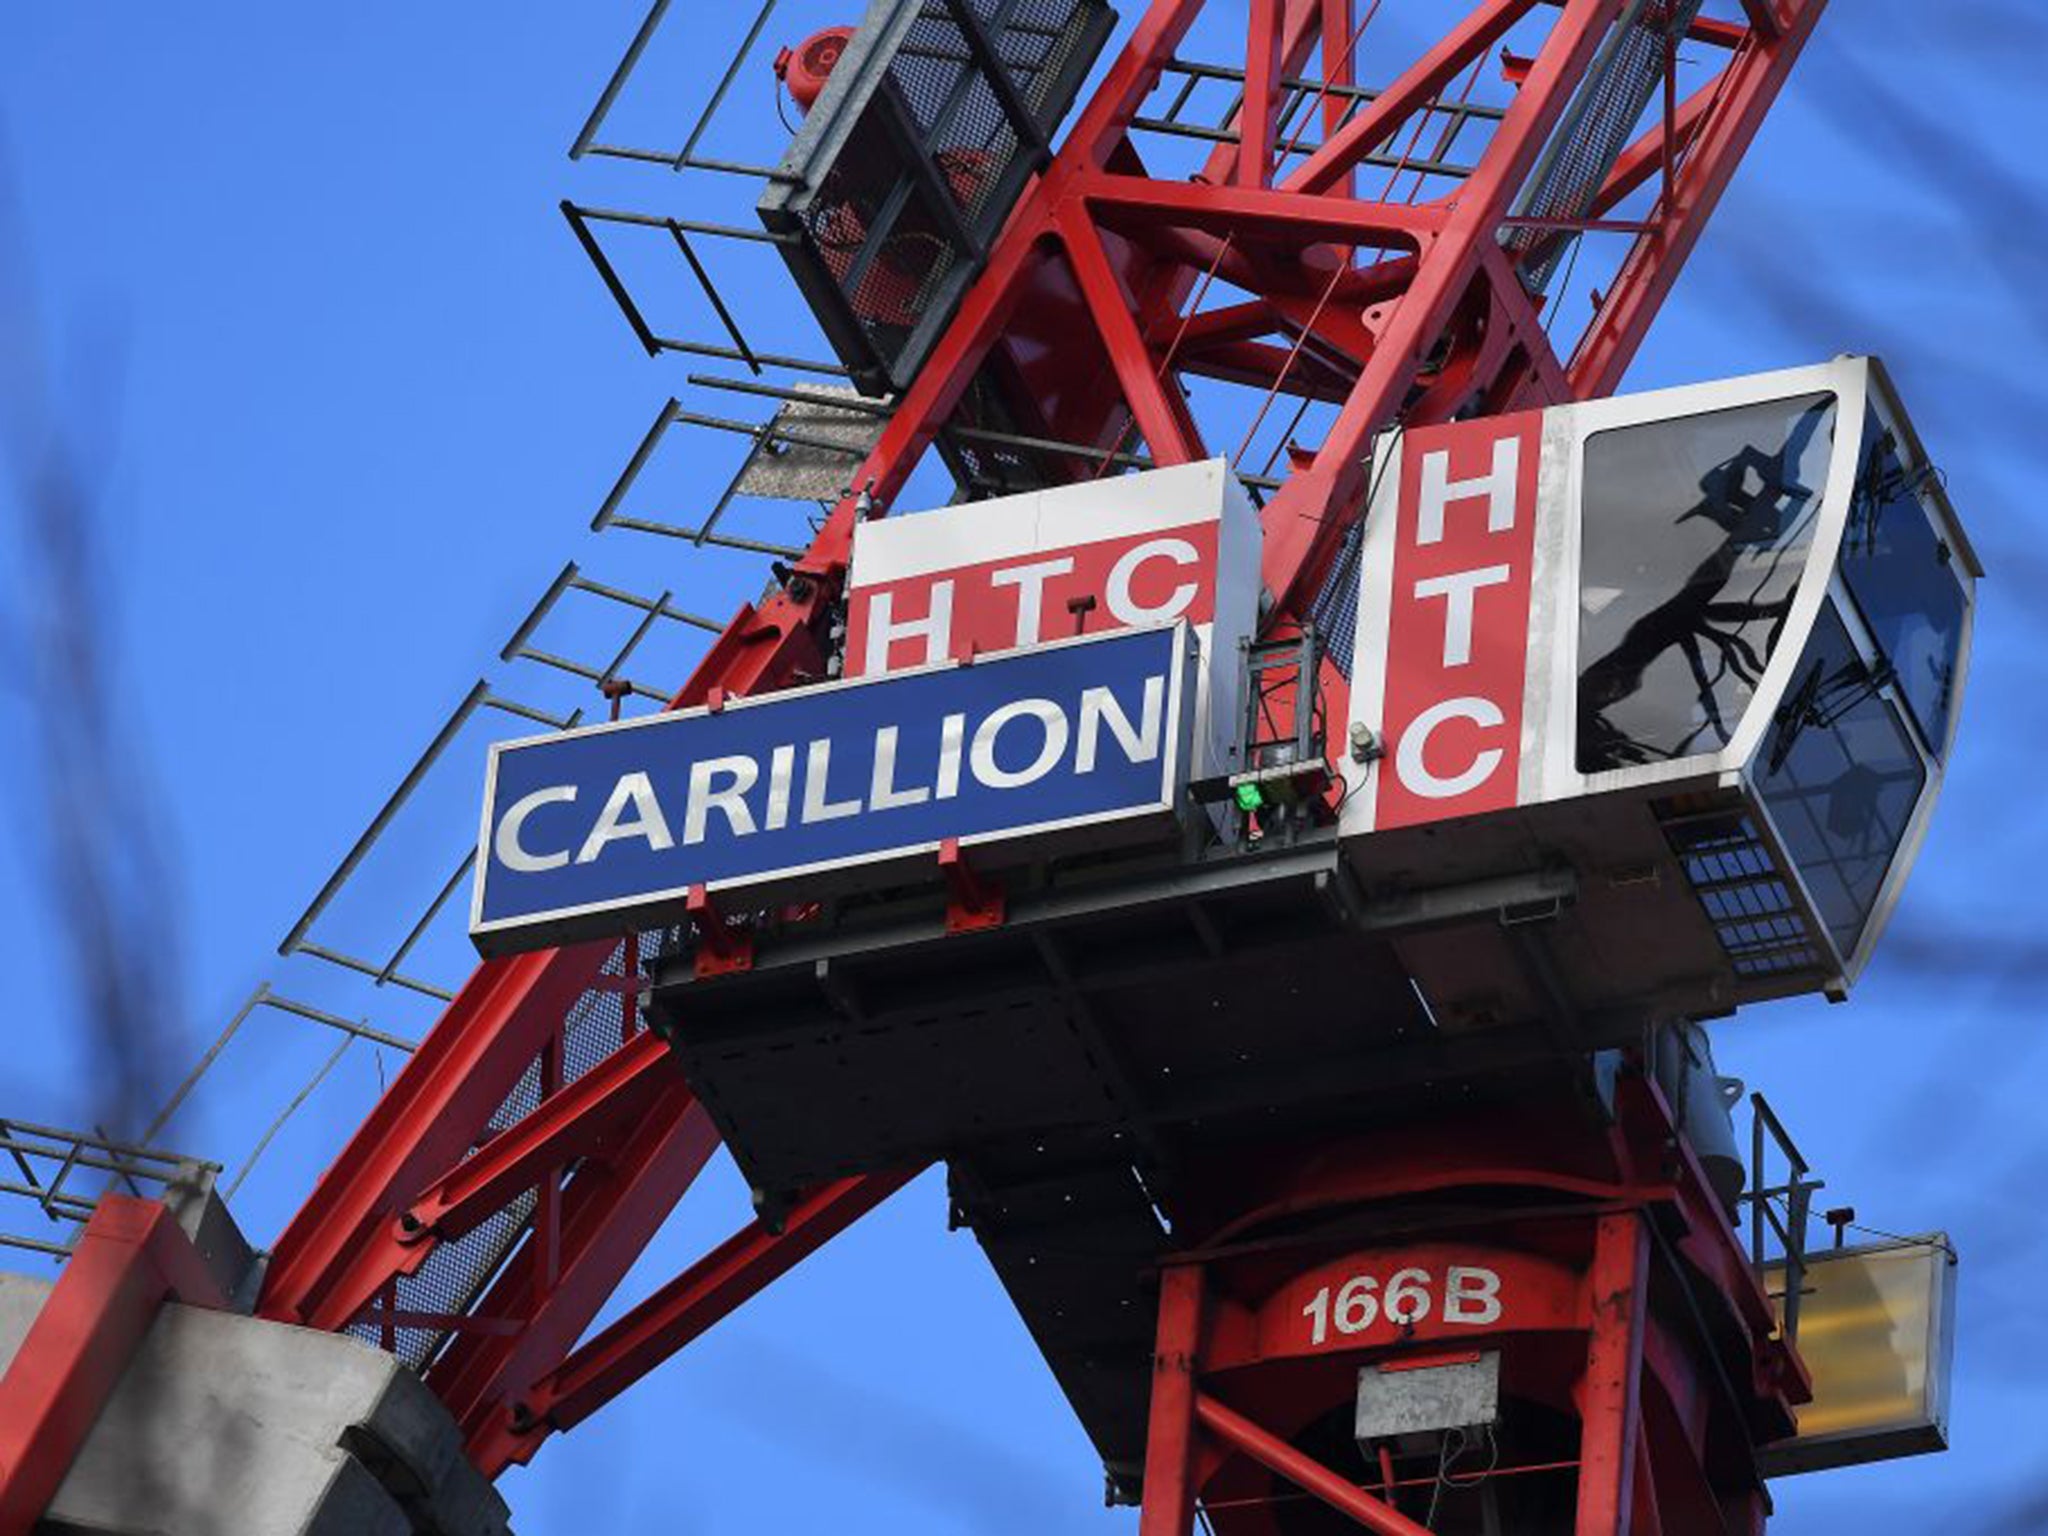 Carillion, which was one of the Government’s most important contractors, crashed into liquidation on 15 January